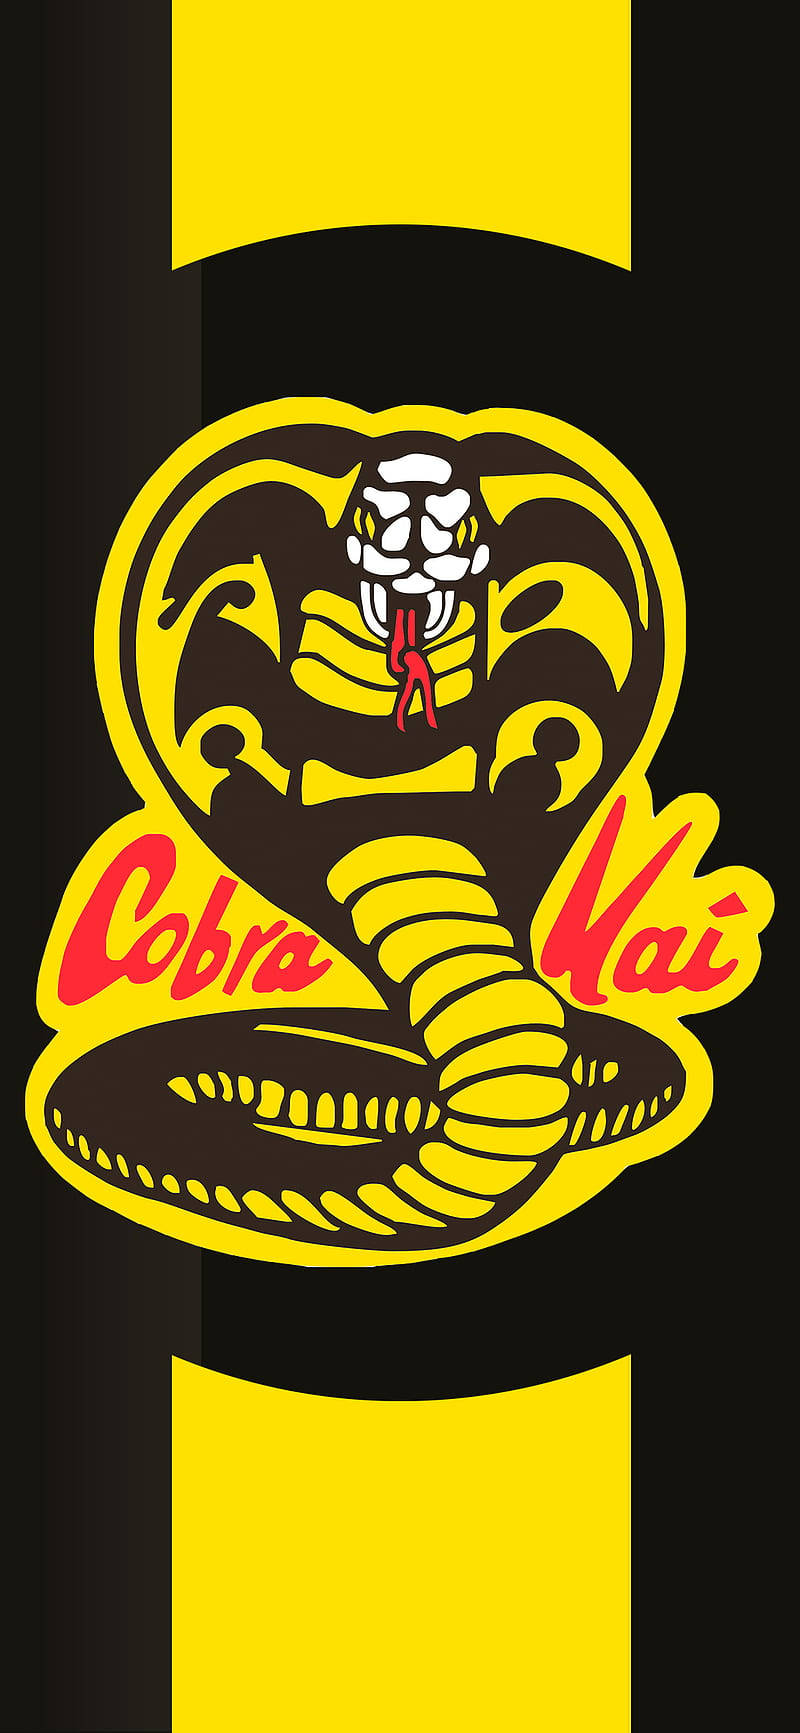 Experience The Power Of Cobra Kai Brand With New